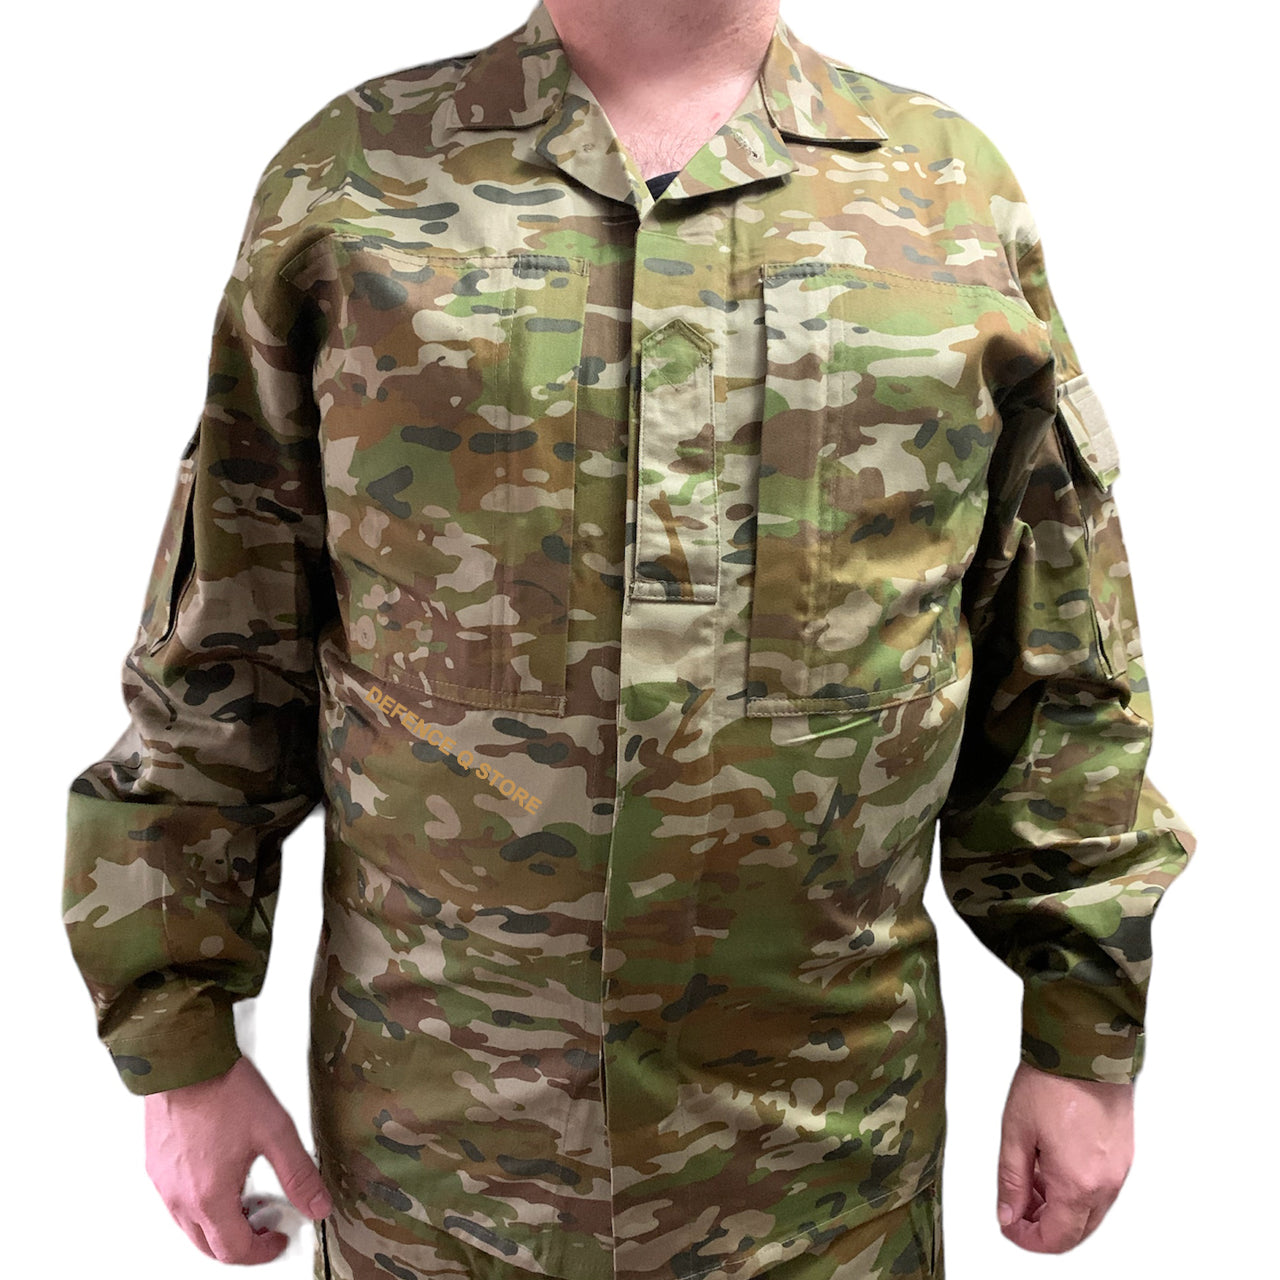 Be ready for any mission with our Army Tactical Field Shirt AMC! Made from 100% cotton, it's durable and comfortable for all day wear. With a single epaulette on the chest and buttoned shoulder pockets, you'll have easy access to necessary items. Plus, the zippered chest pockets add extra storage space. Customize your look by adding velcro patches to both arms. This shirt is a must-have for any tactical enthusiast. www.defenceqstore.com.au